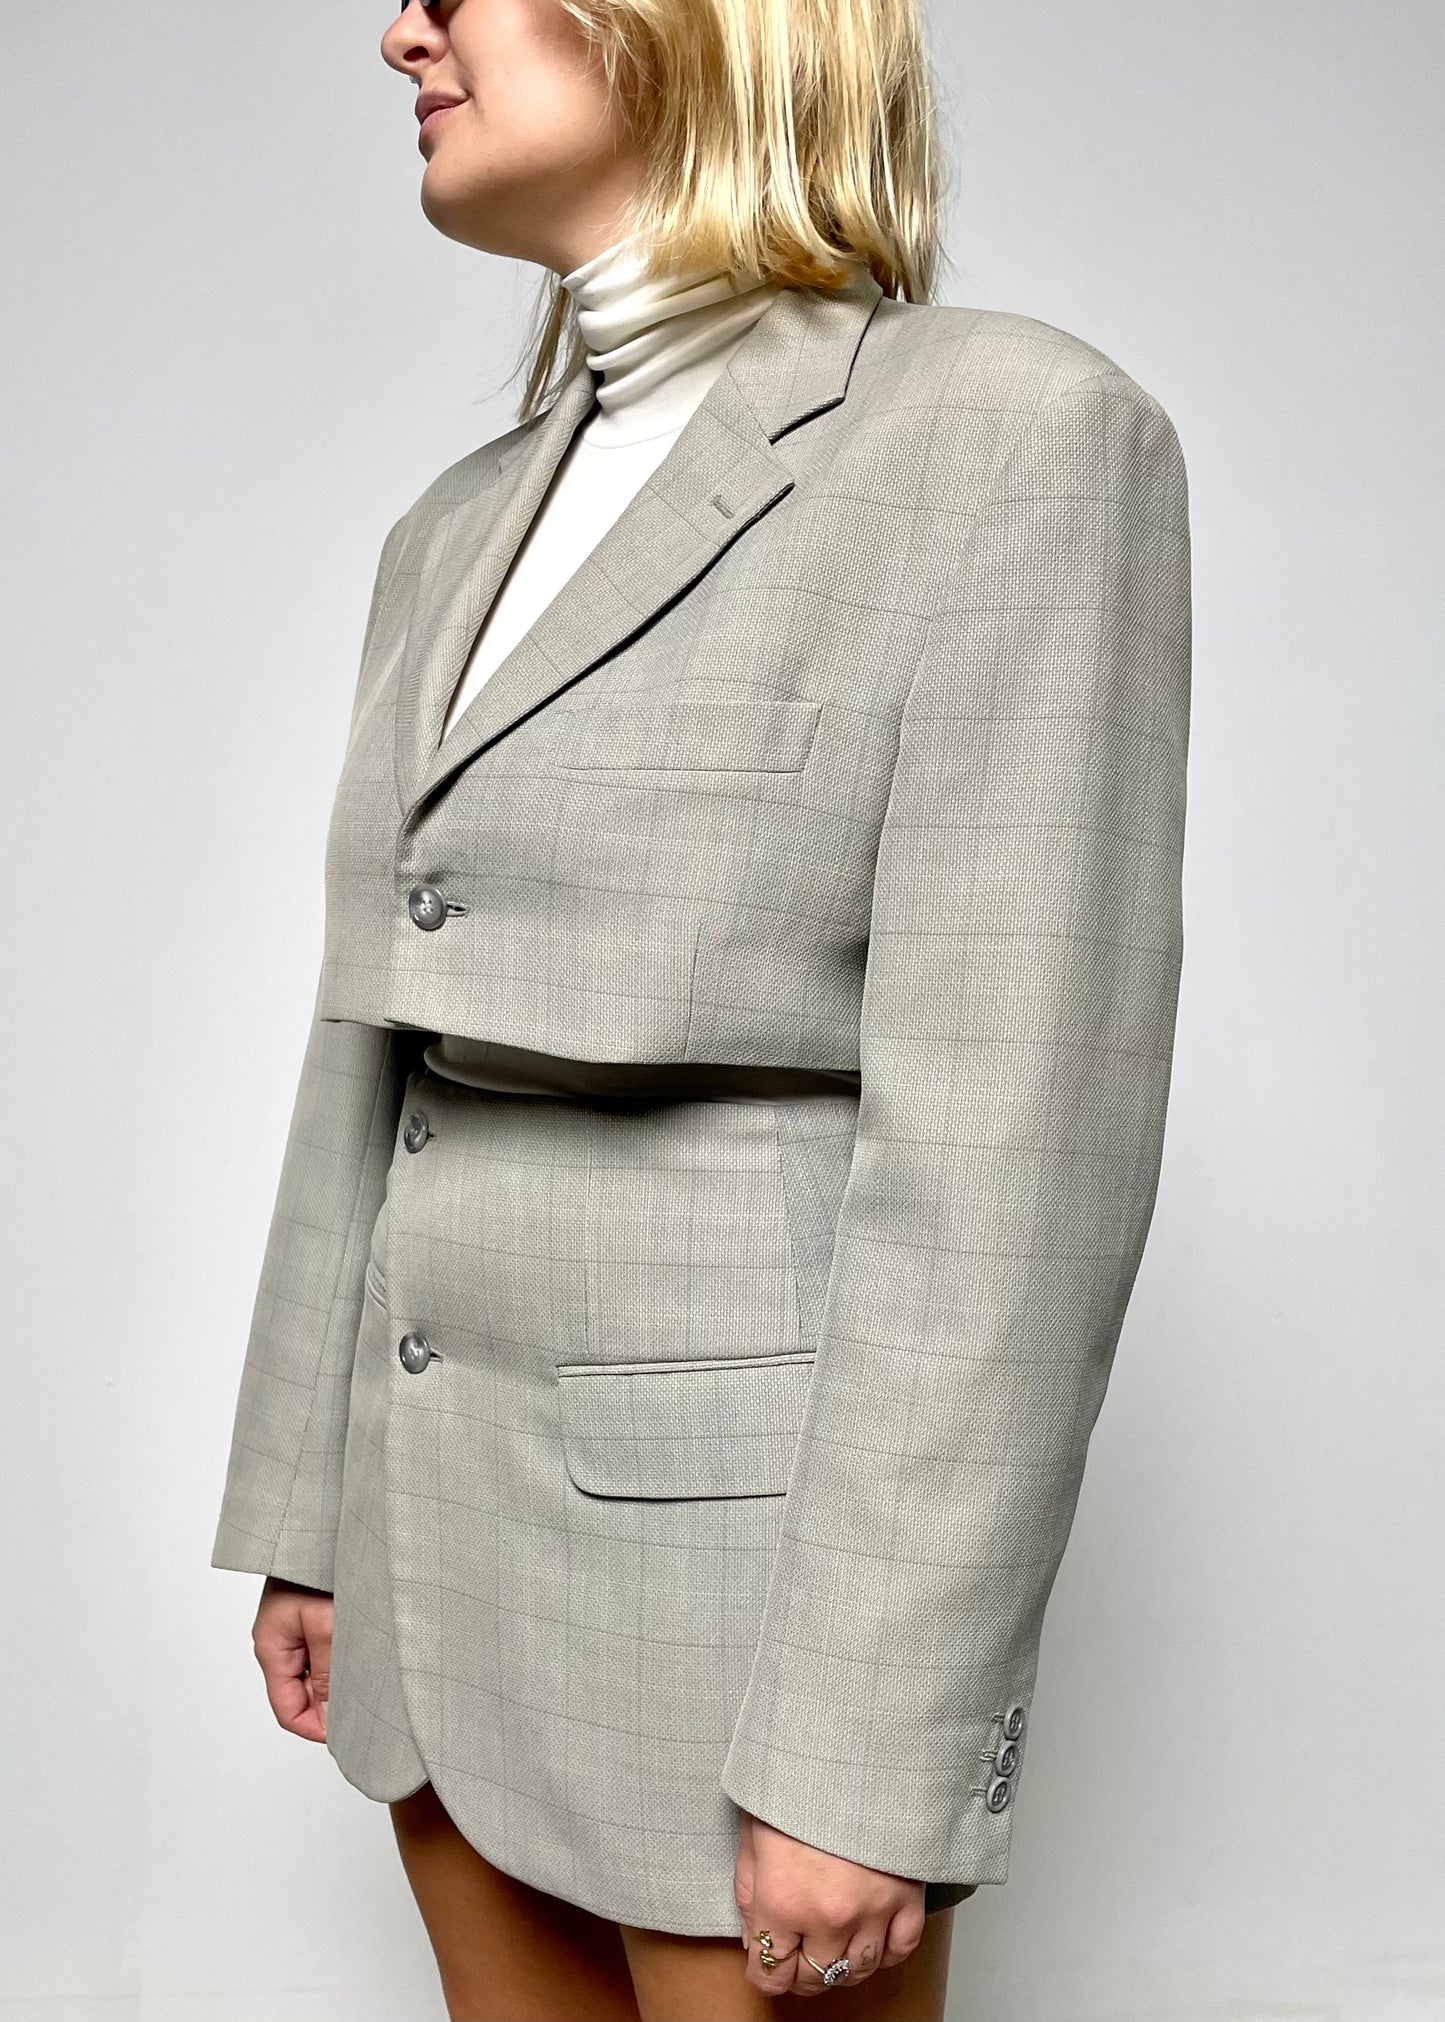 Pearl Skirt Suit